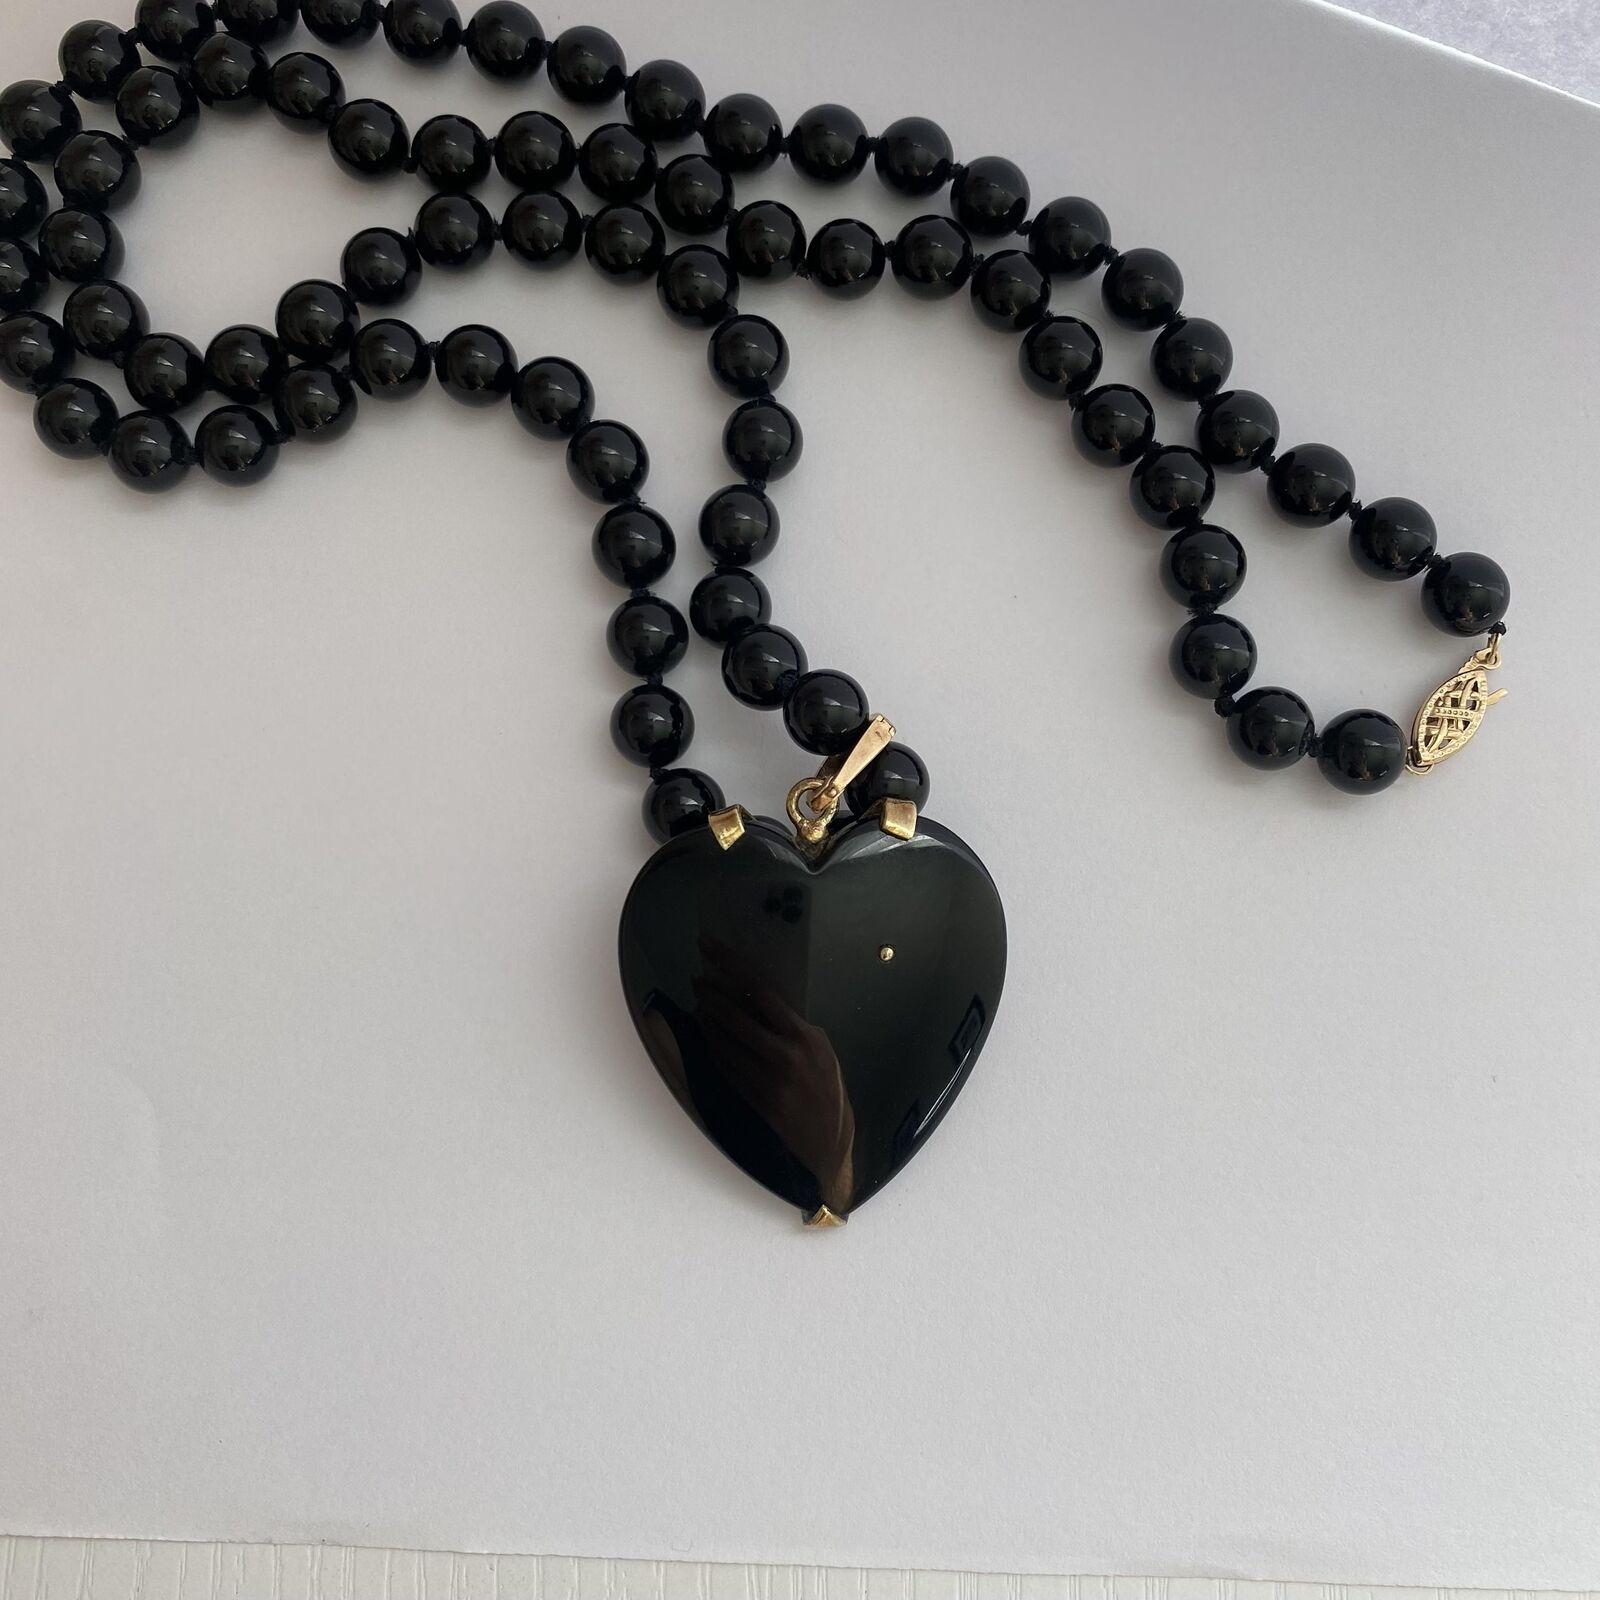 Vintage Onyx Heart Necklace 14K Yellow Gold With Diamonds 53.76G In Excellent Condition For Sale In Los Angeles, CA